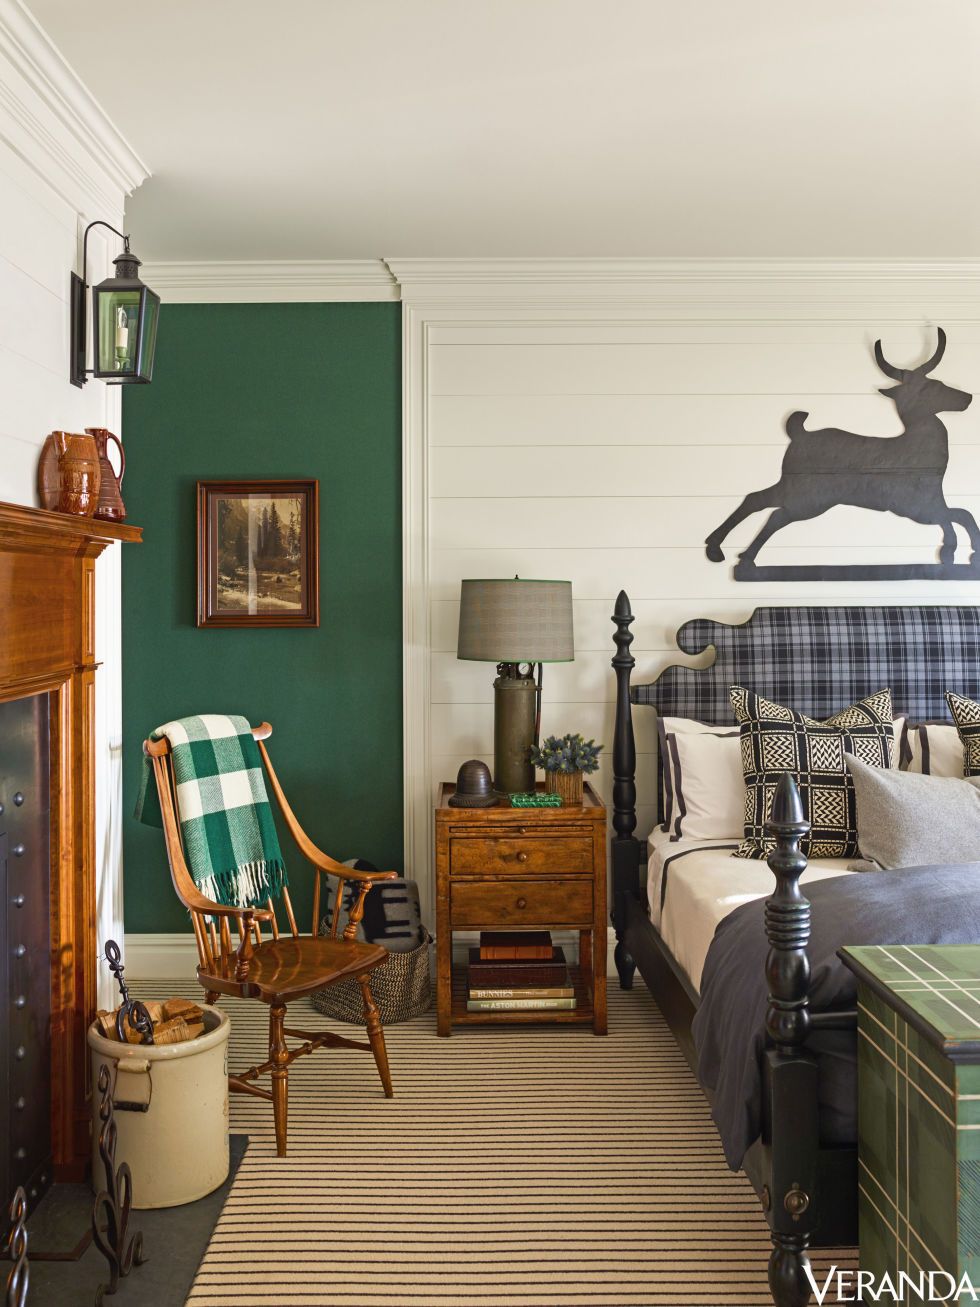 green fabric on walls in a bedroom